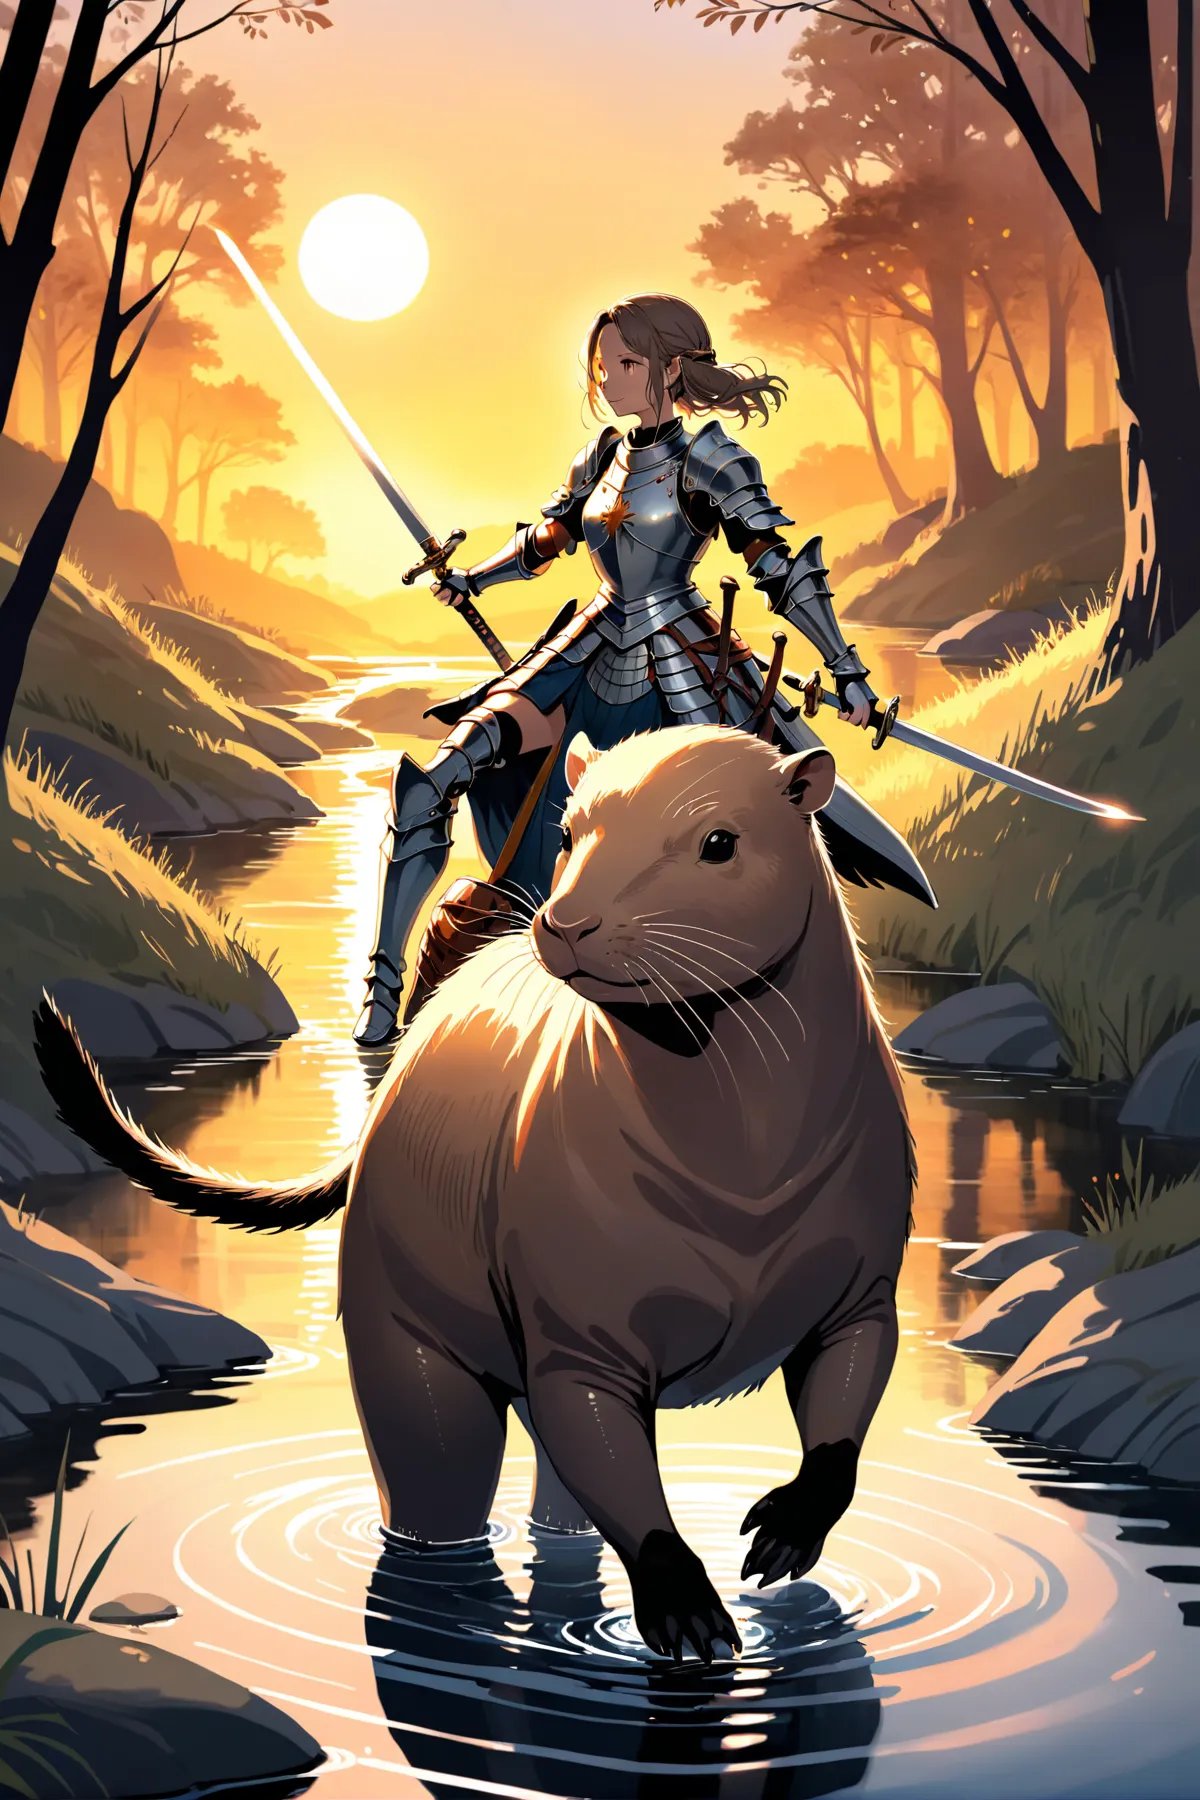 Illustration of a female knight riding a majestic nutria through a serene stream, gracefully wielding a sword as the sun sets behind them, casting a warm glow across the peaceful scene